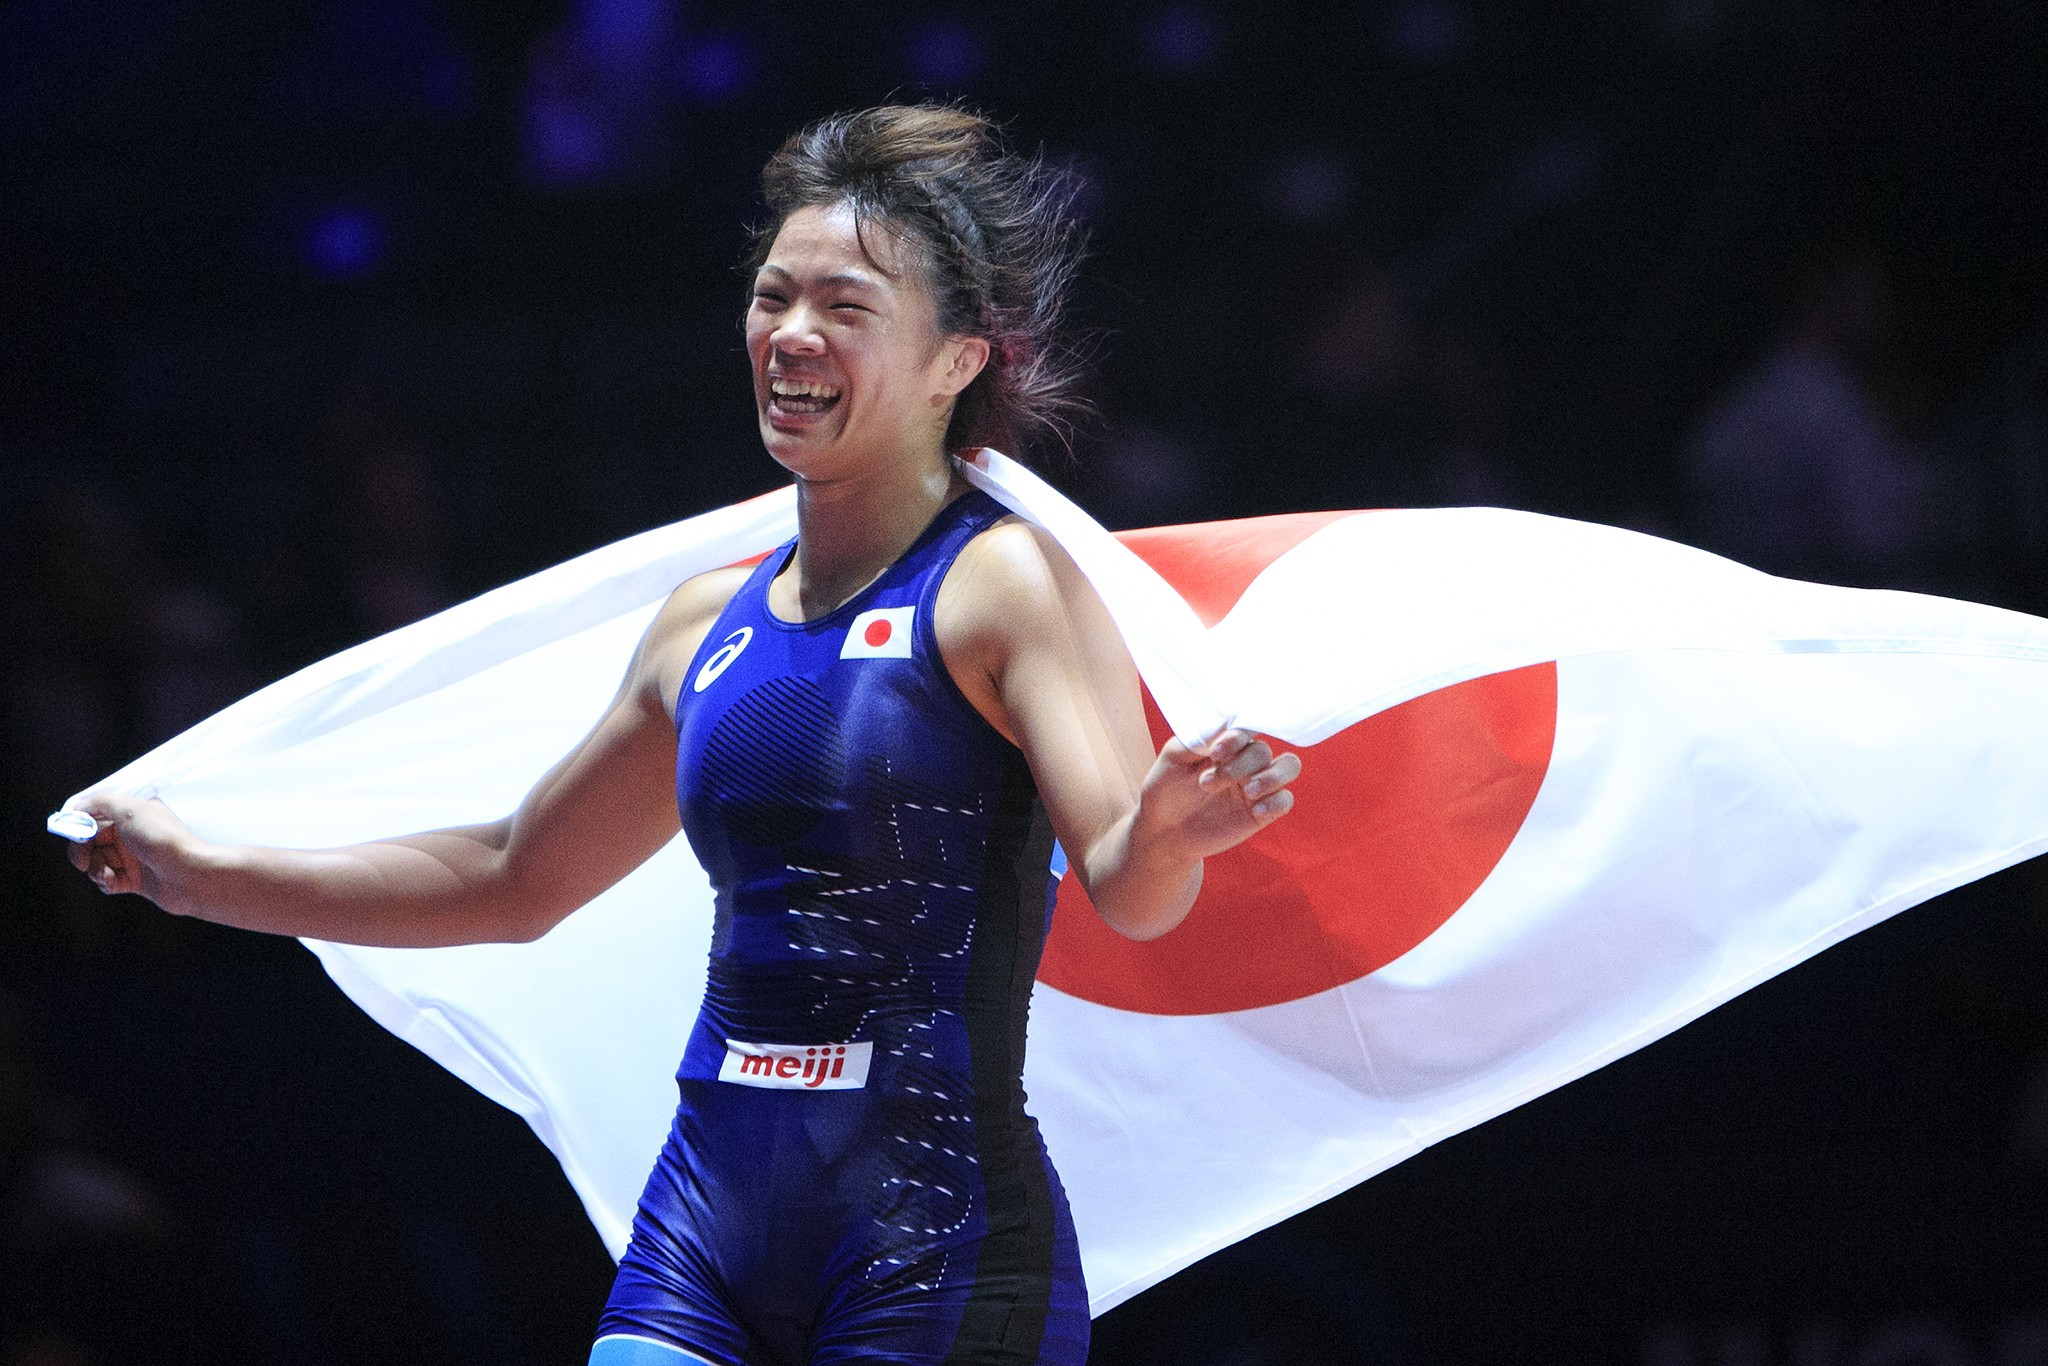 Kawai celebrated by running around the mat draped in a Japanese flag ©UWW